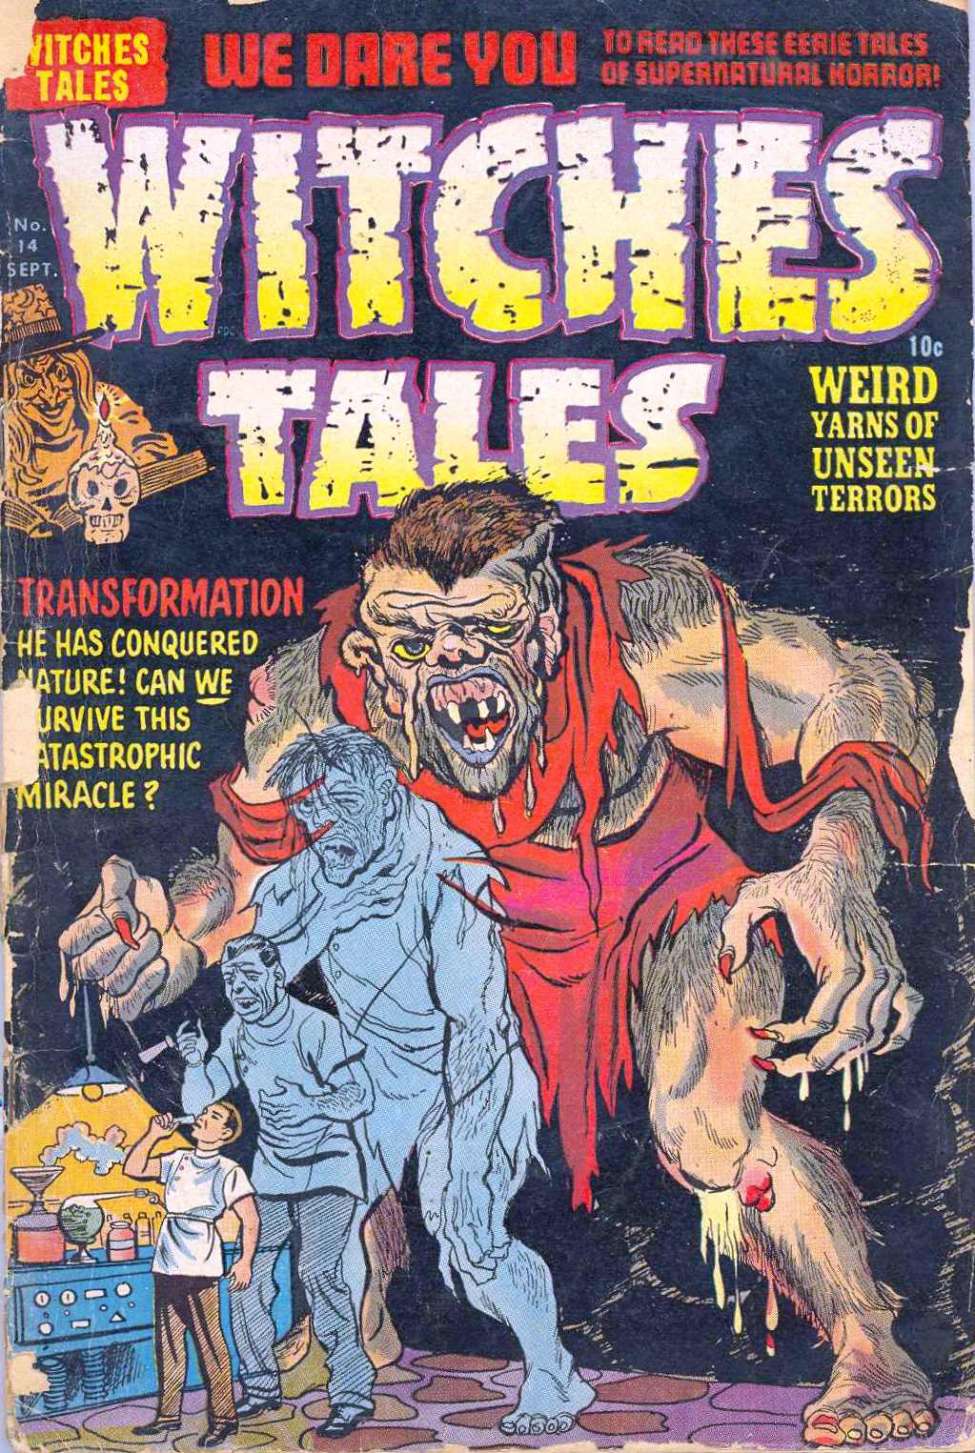 Comic Book Cover For Witches Tales 14